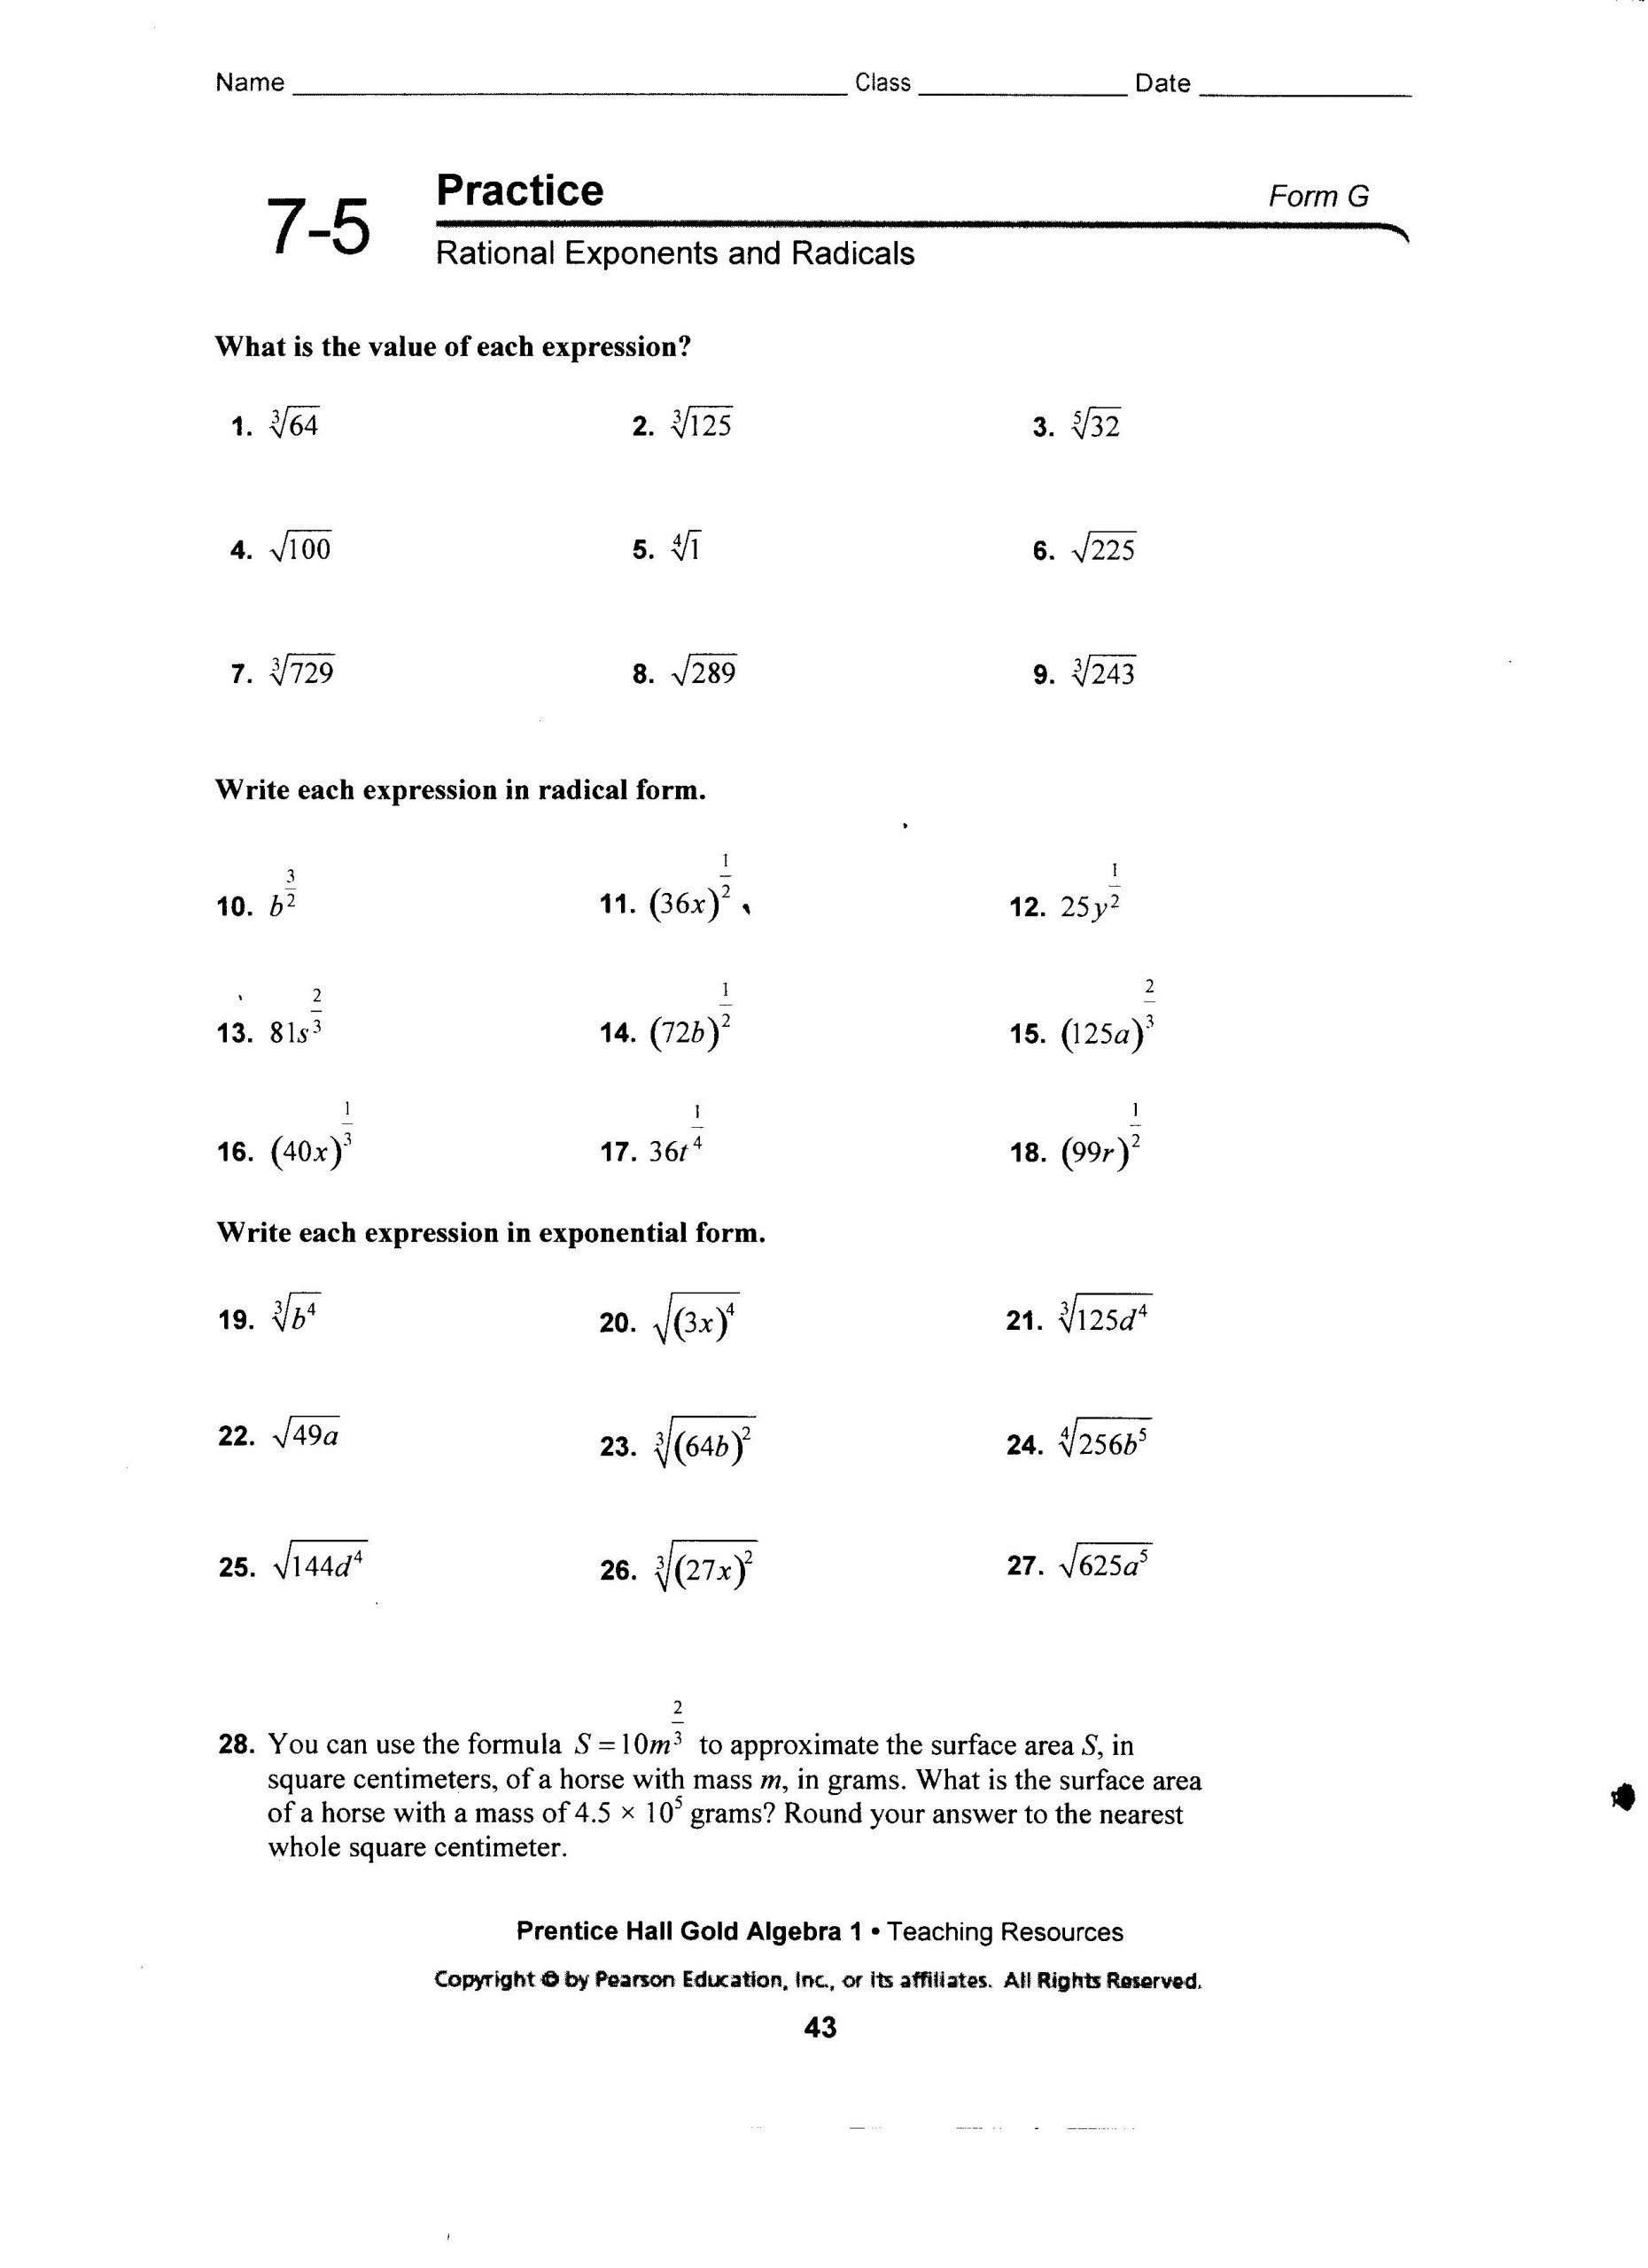 Radicals and Rational Exponents Worksheet 33 Radical Expressions and Rational Exponents Worksheet